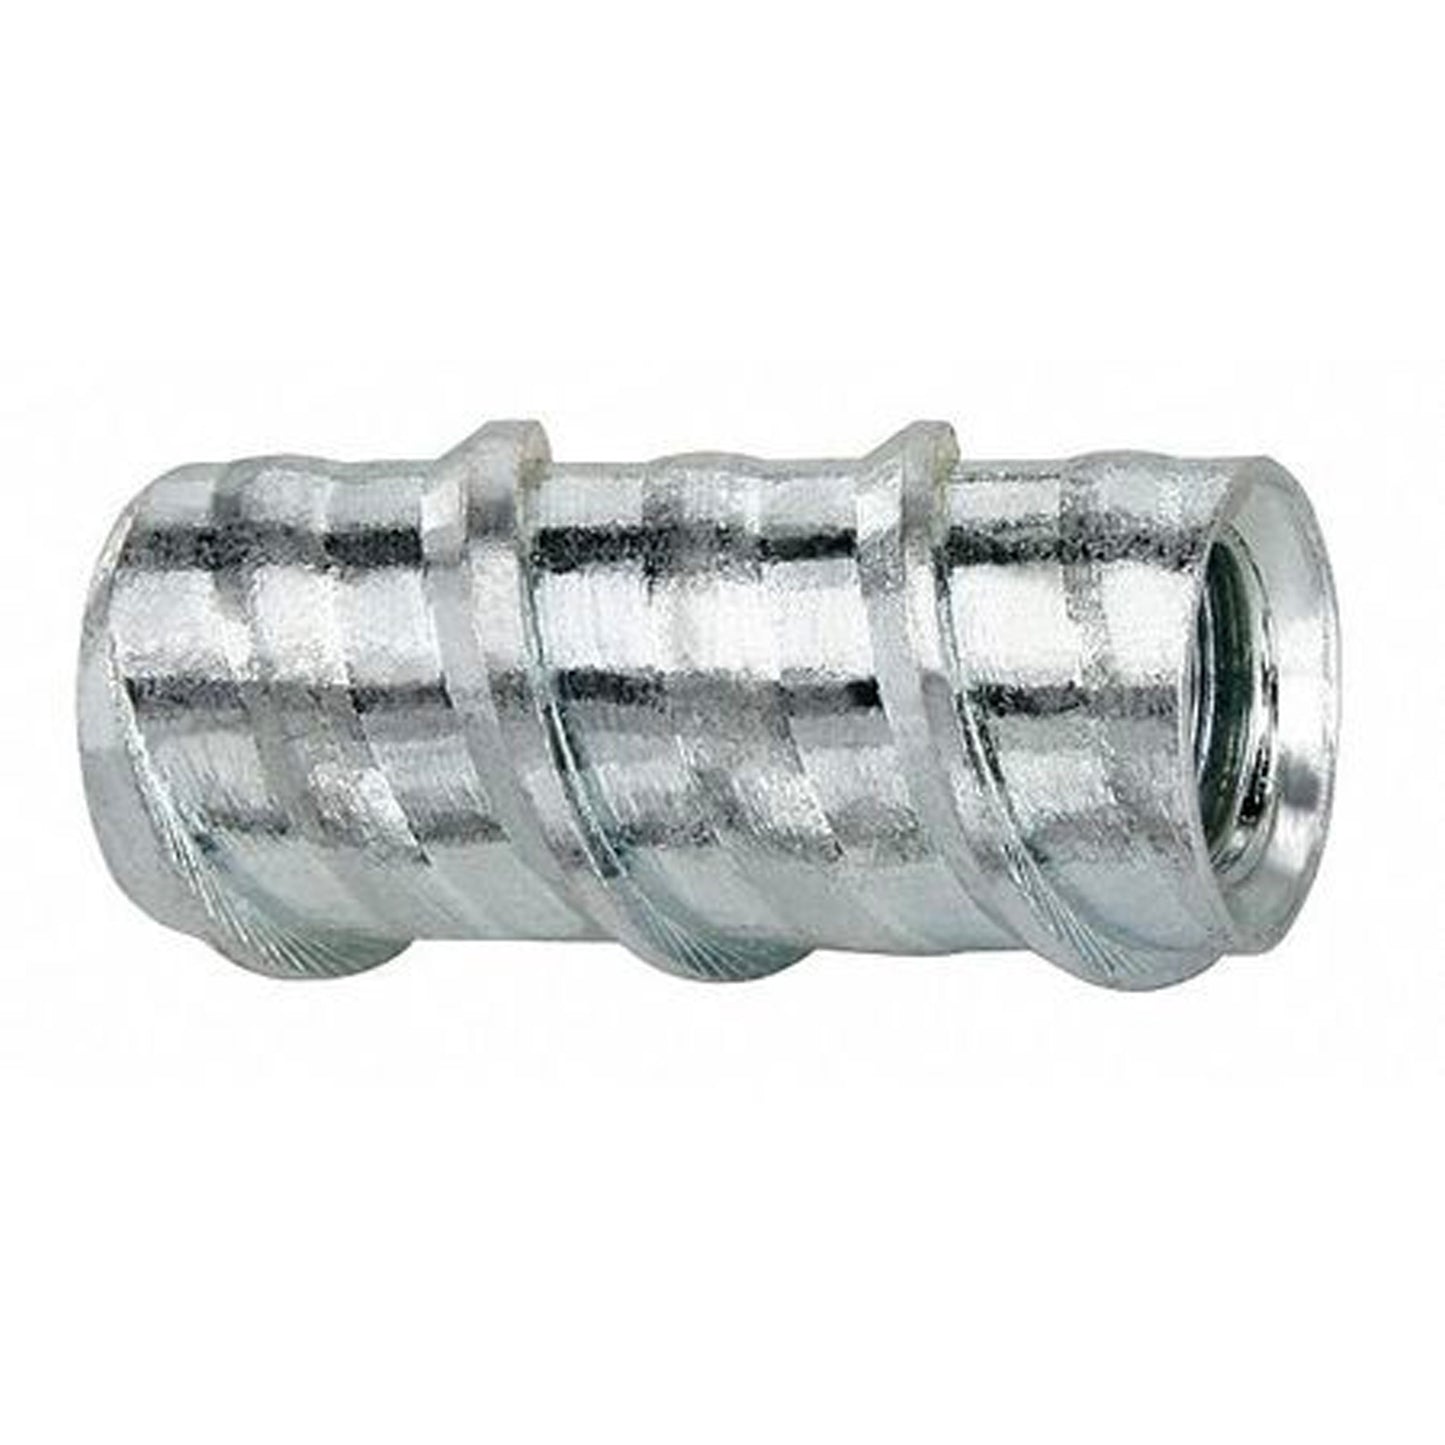 6401SD-PWR Self-Tapping Screw Anchor, 3/8"-16, Zinc Plated